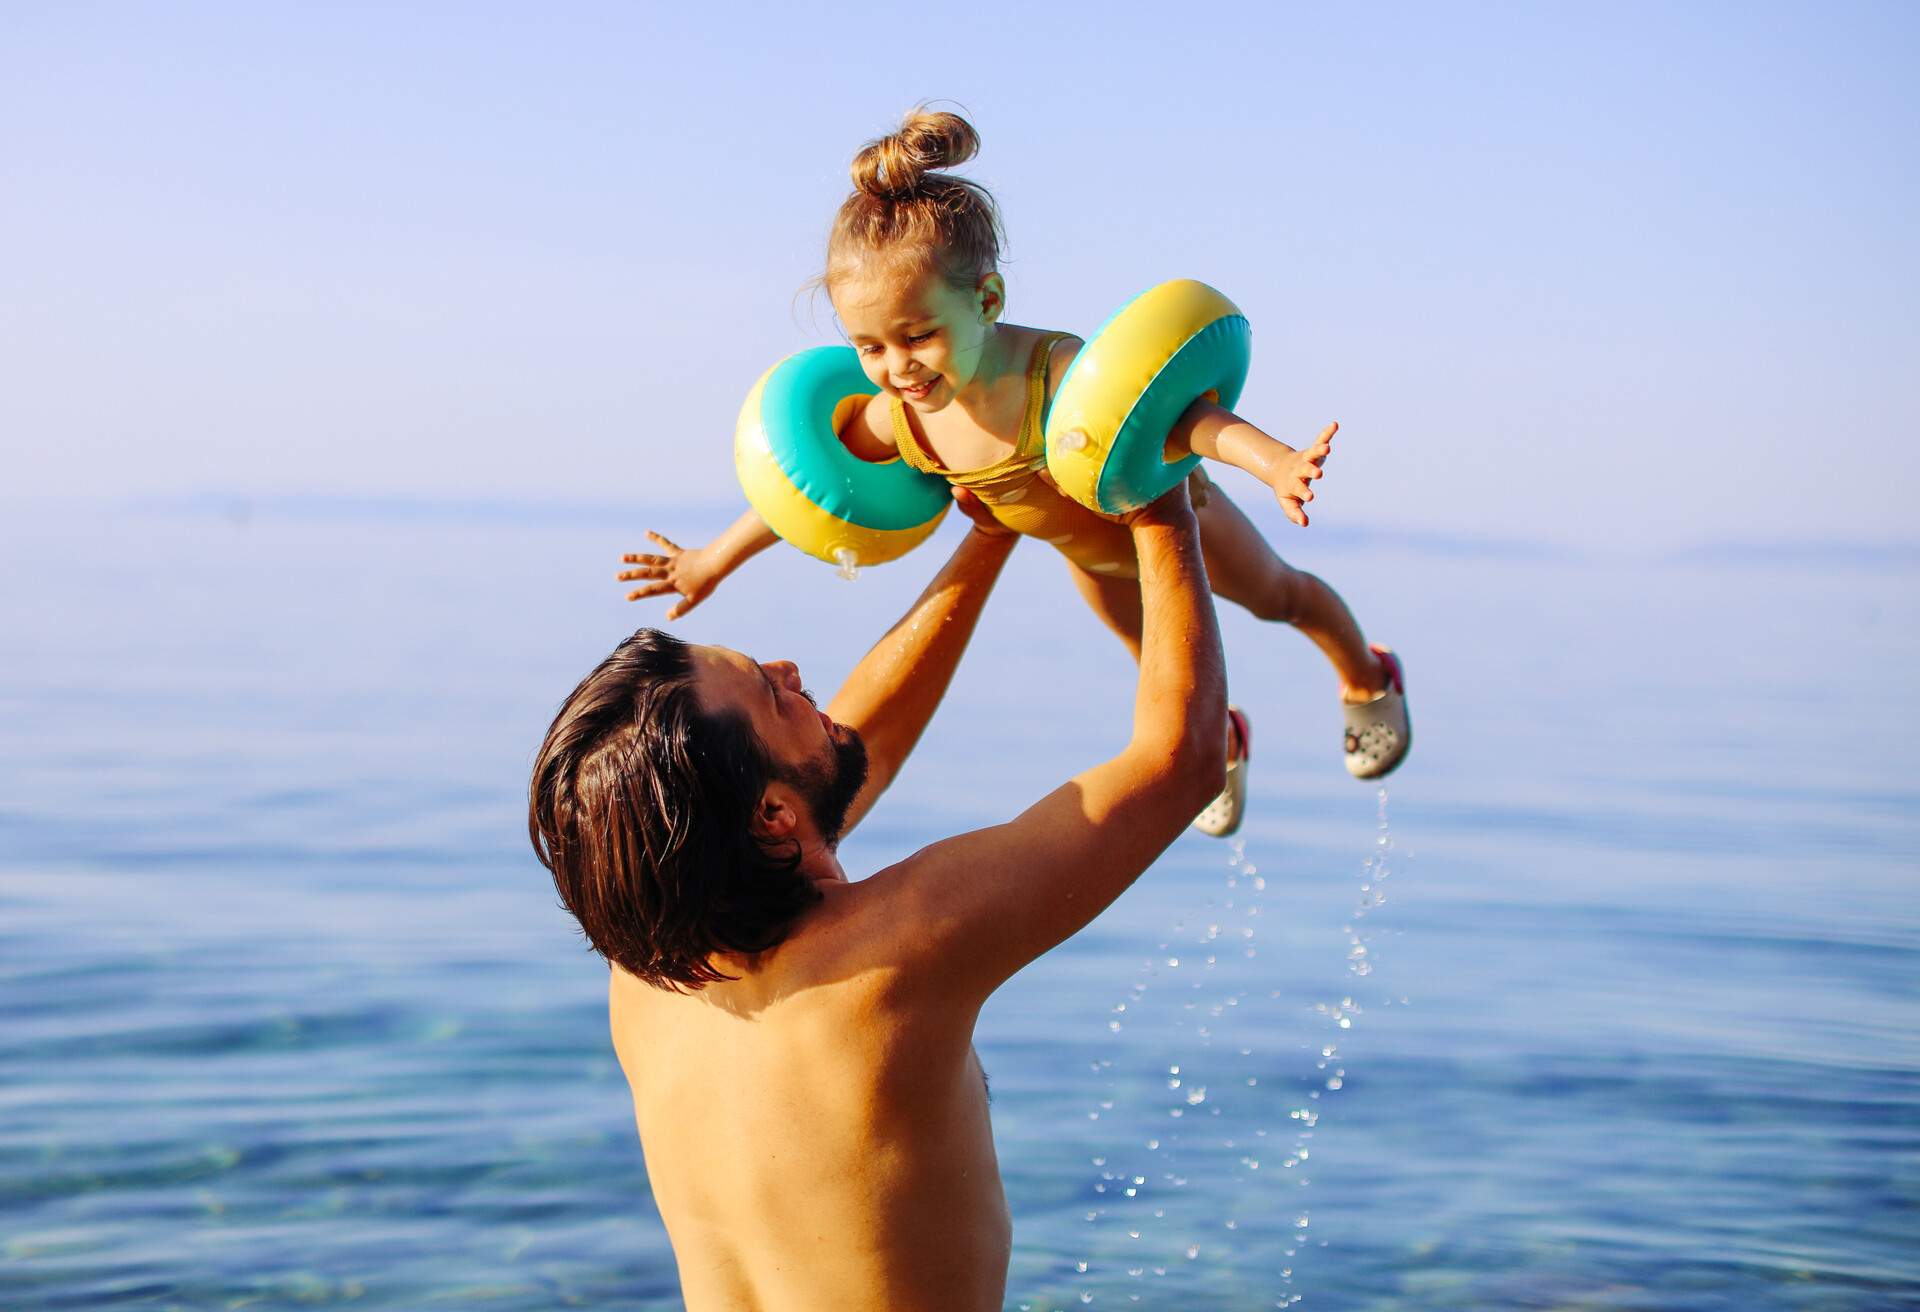 Father is throwing his daughter into the water with lots of splashing. Cute little girl having fun with parents in sea 